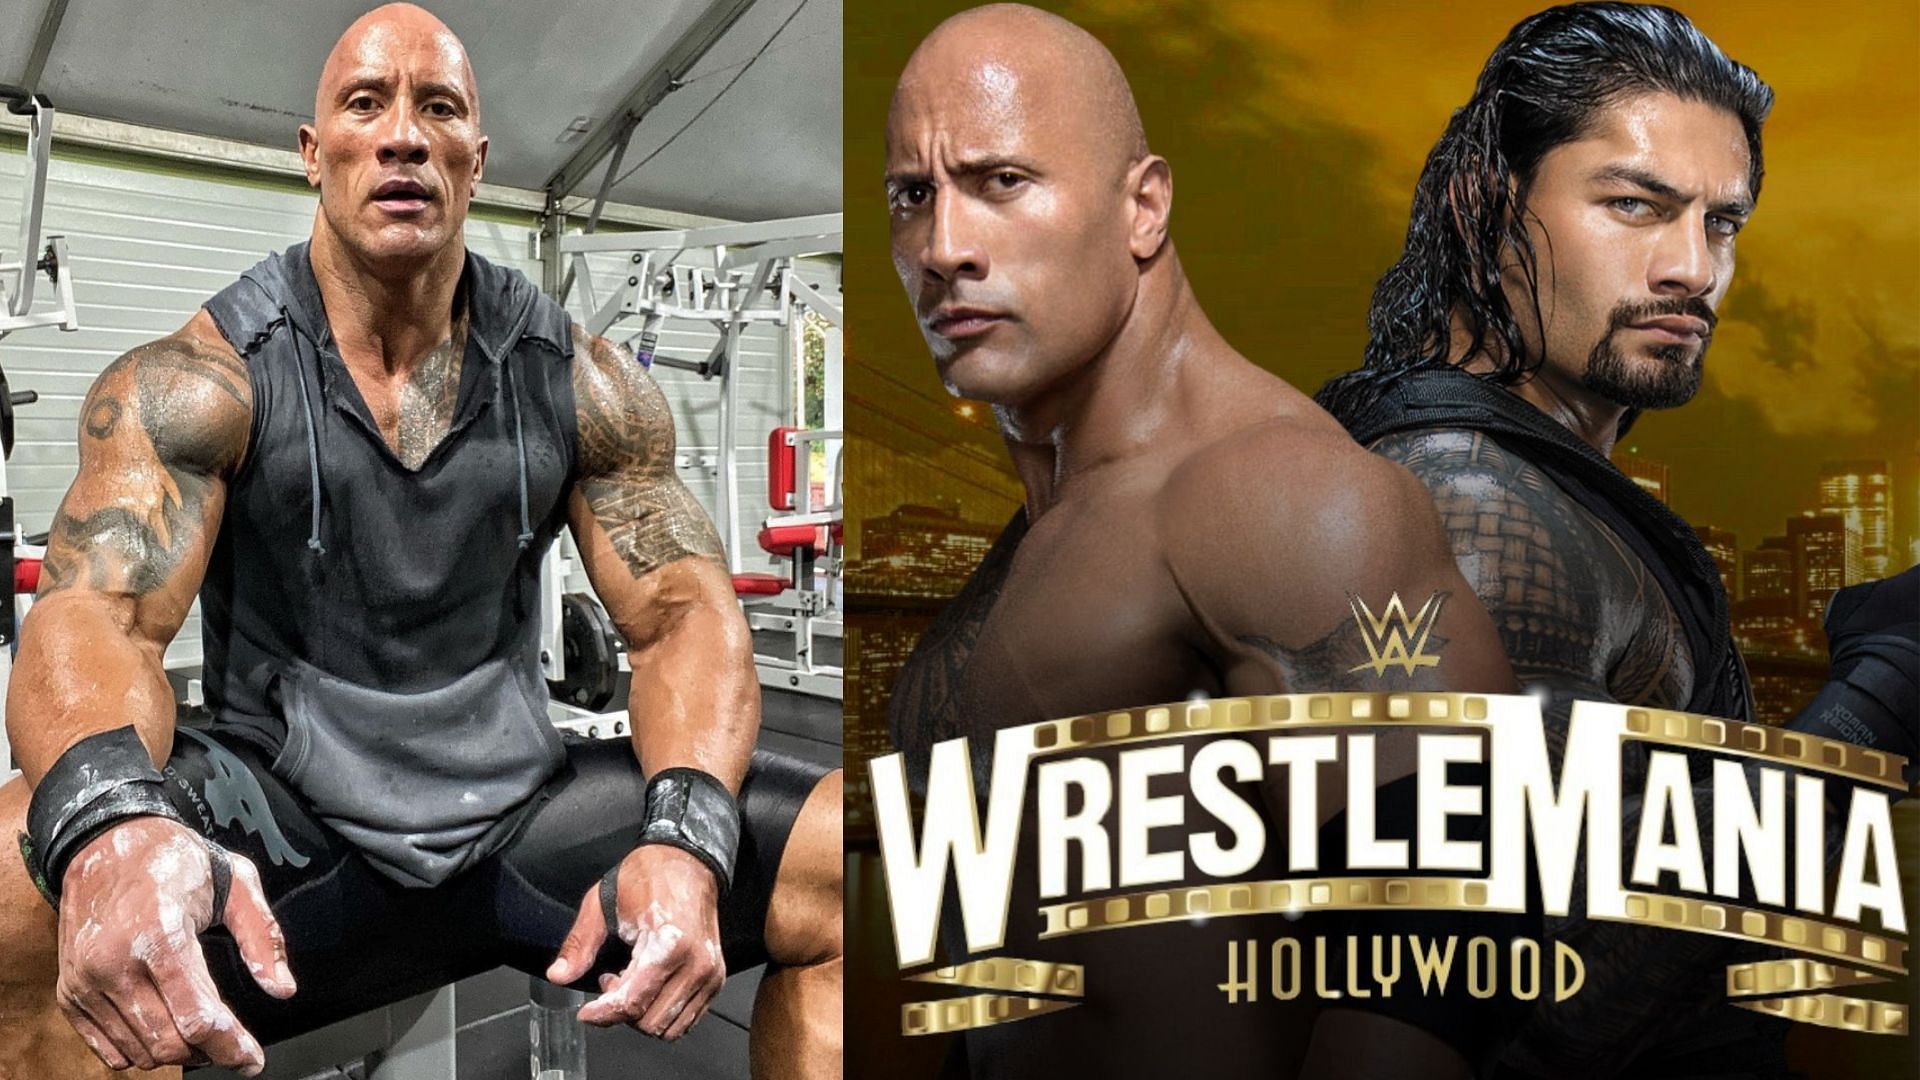 The Rock's WWE return at WrestleMania Hollywood? Will The Rock return